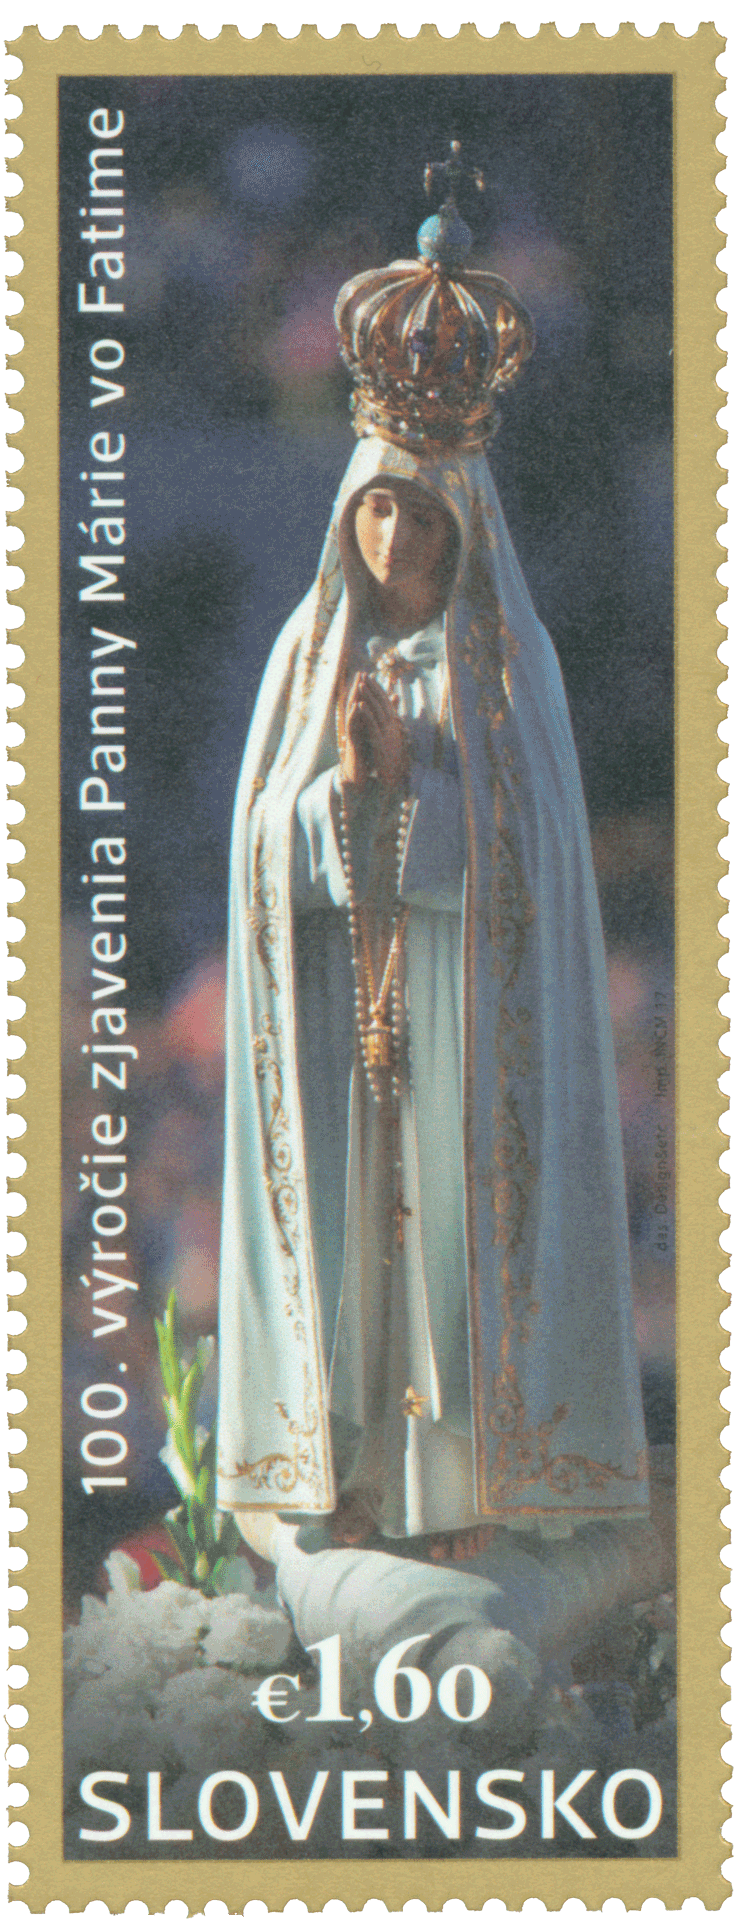 630 - 100<sup>th</sup> Anniversary of Our Lady of Fatima Apparitions: Joint Issue with Portugal, Poland and Luxembourg